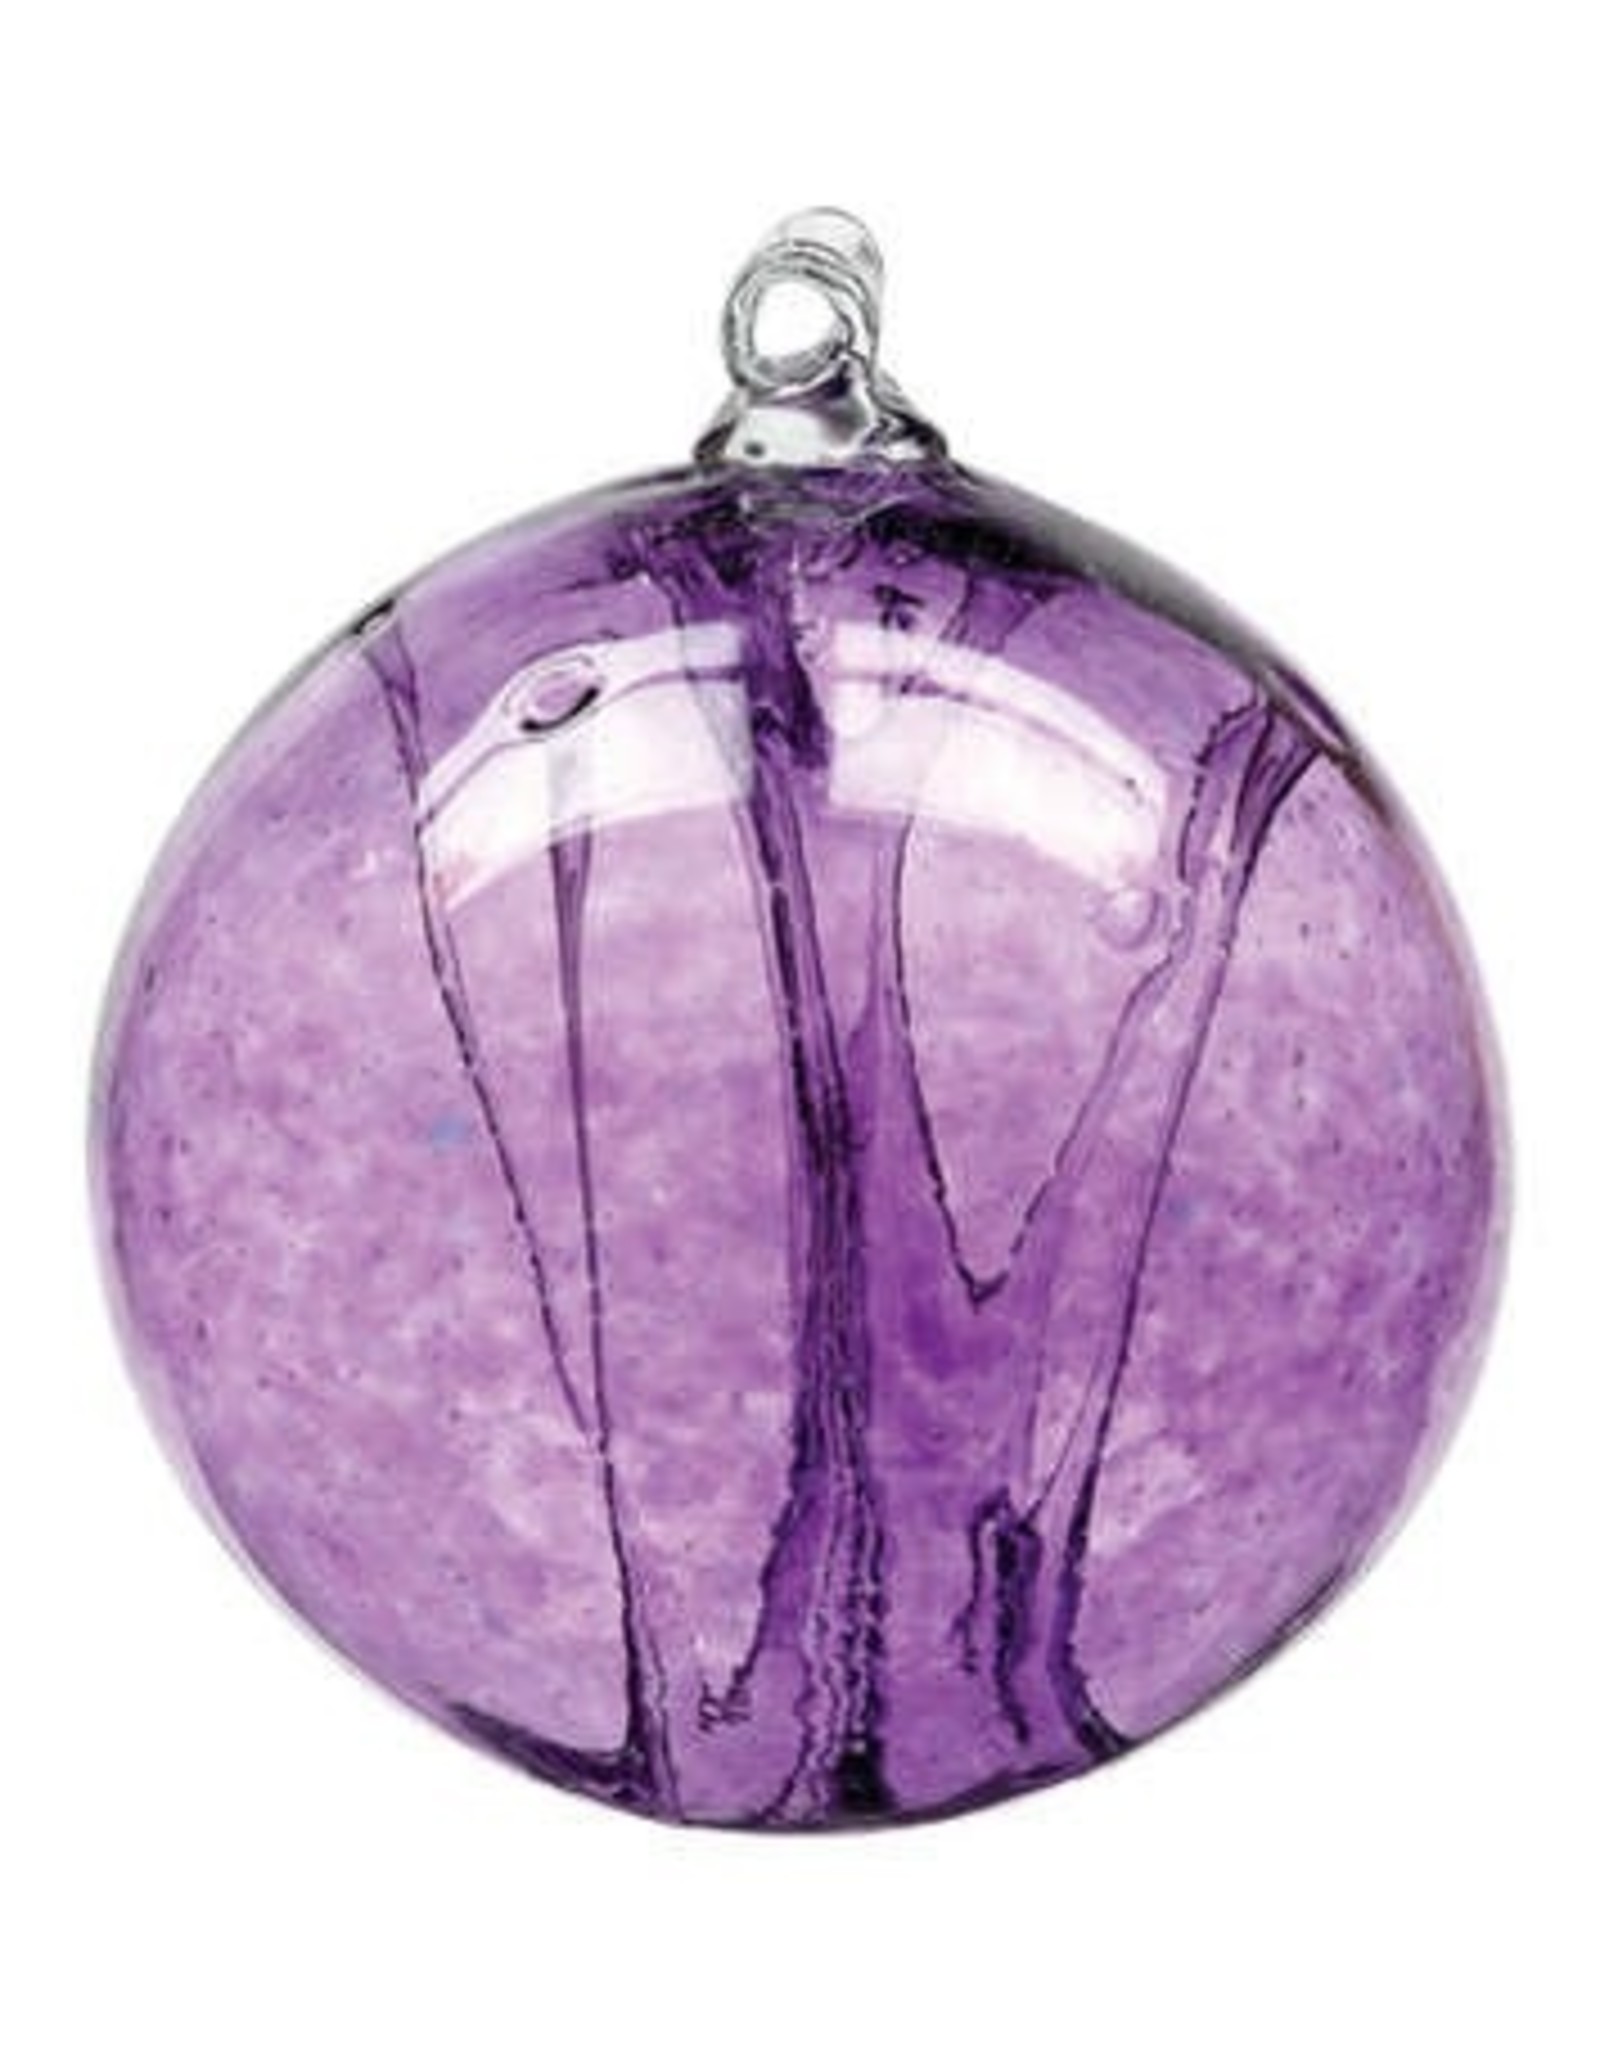 6" Olde English Witch Ball-Amethyst